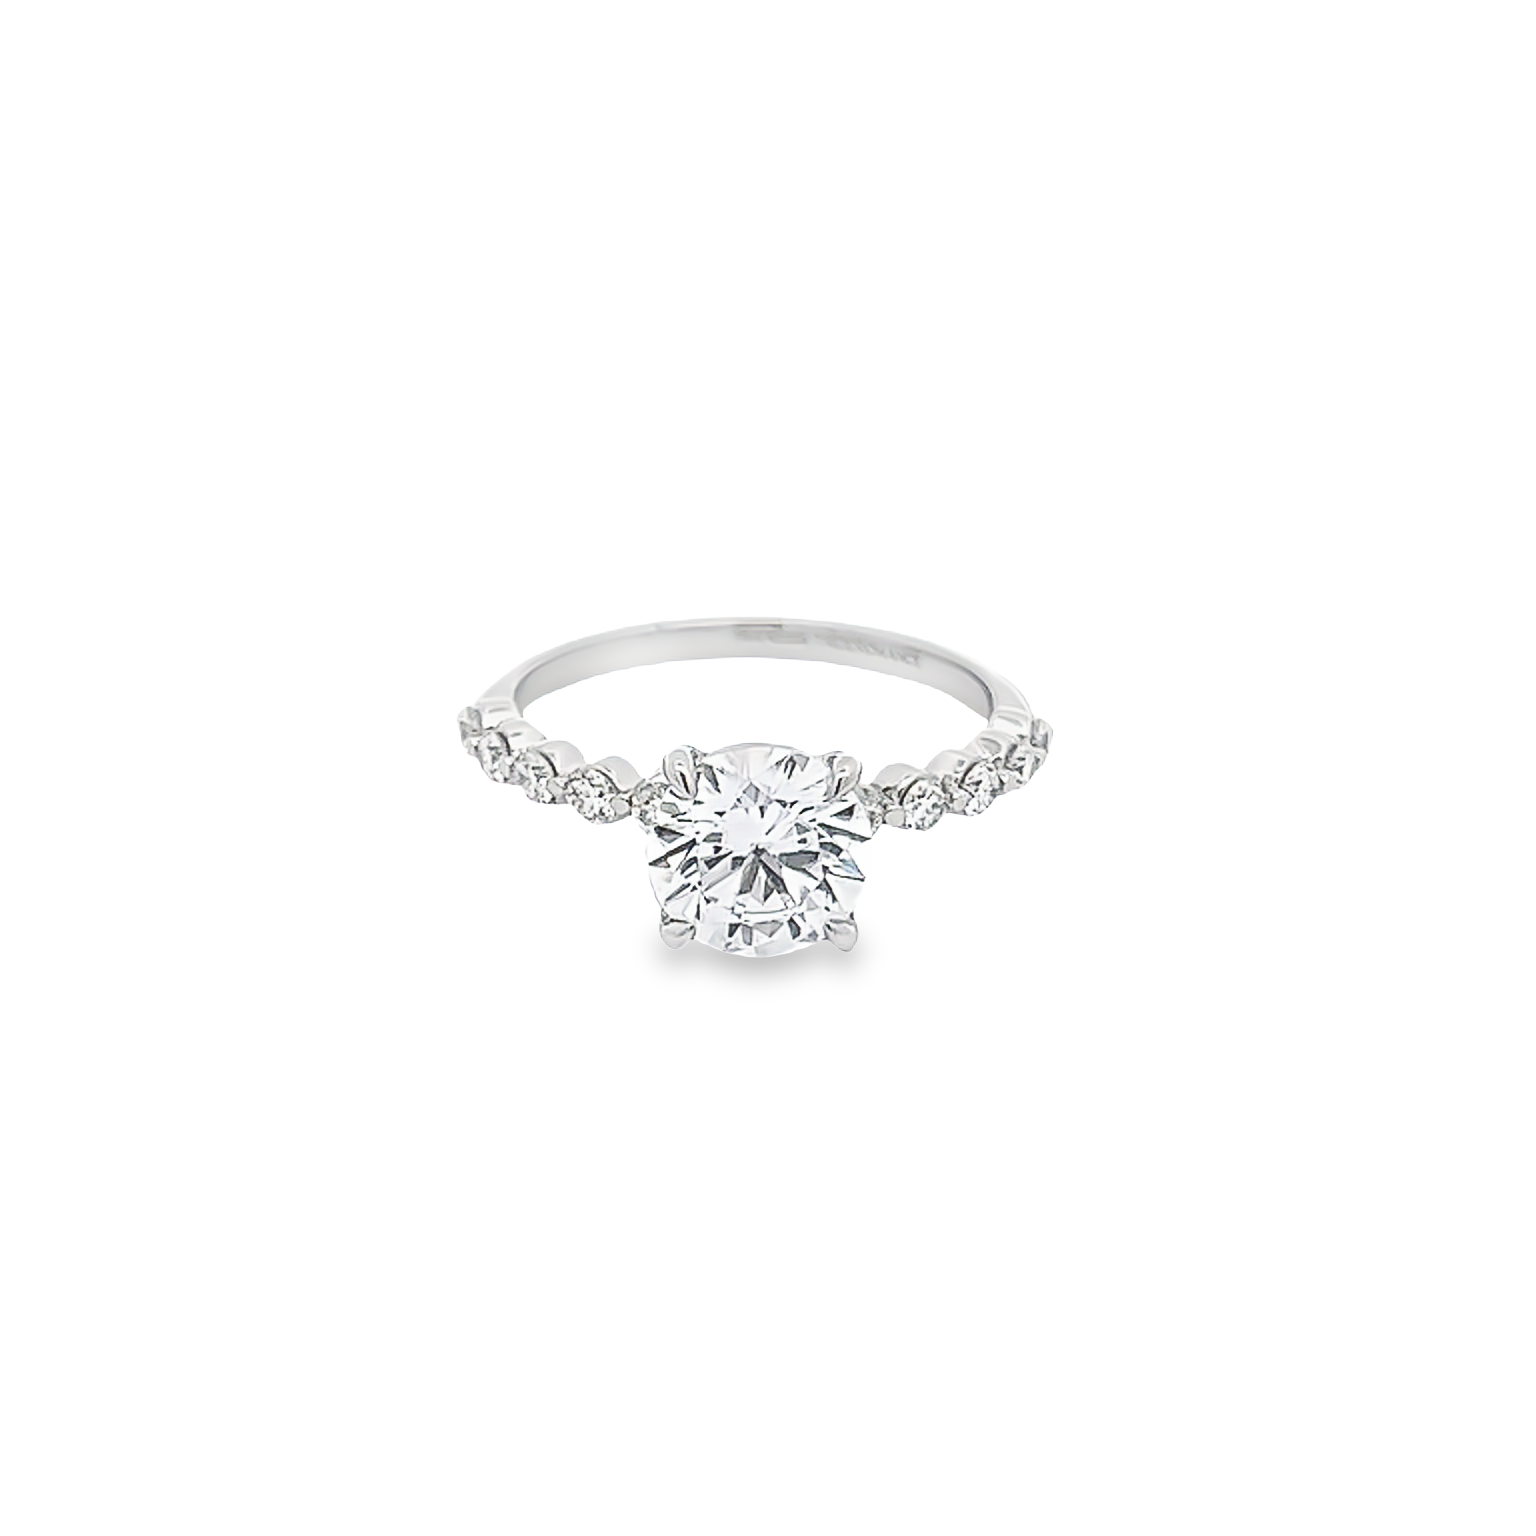 14 Karat white gold semi mount engagement ring with 10=0.35 total weight Round Brilliant G VS Diamonds. Size 7